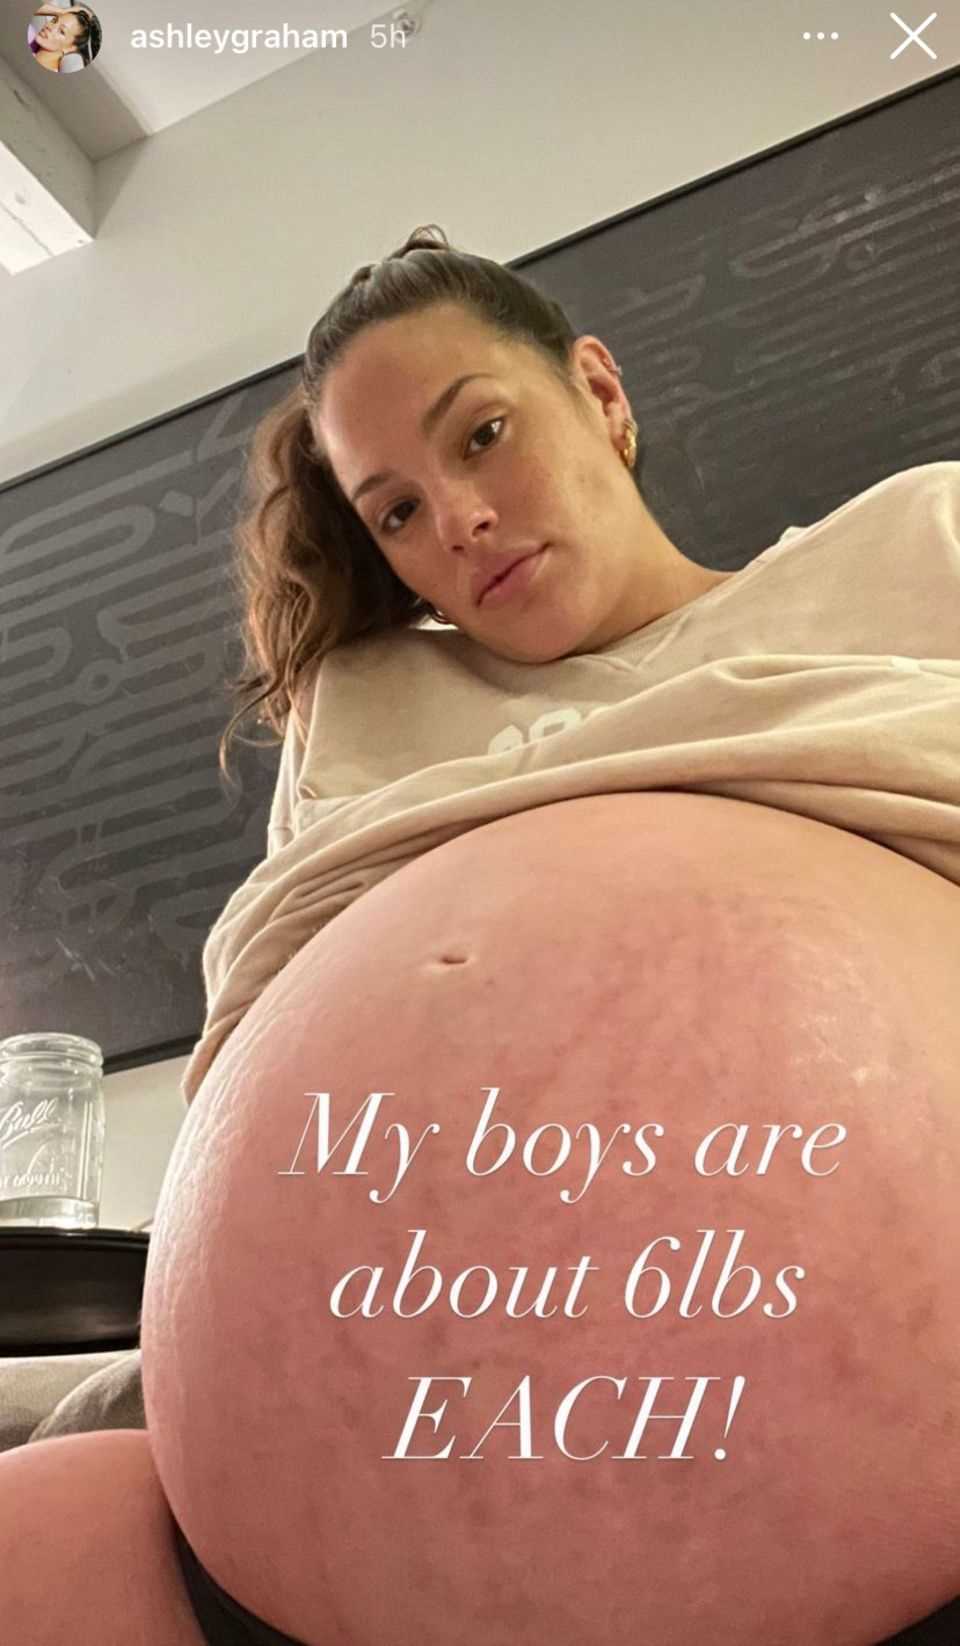 Ashley Graham enters "serious" Pregnancy Update.